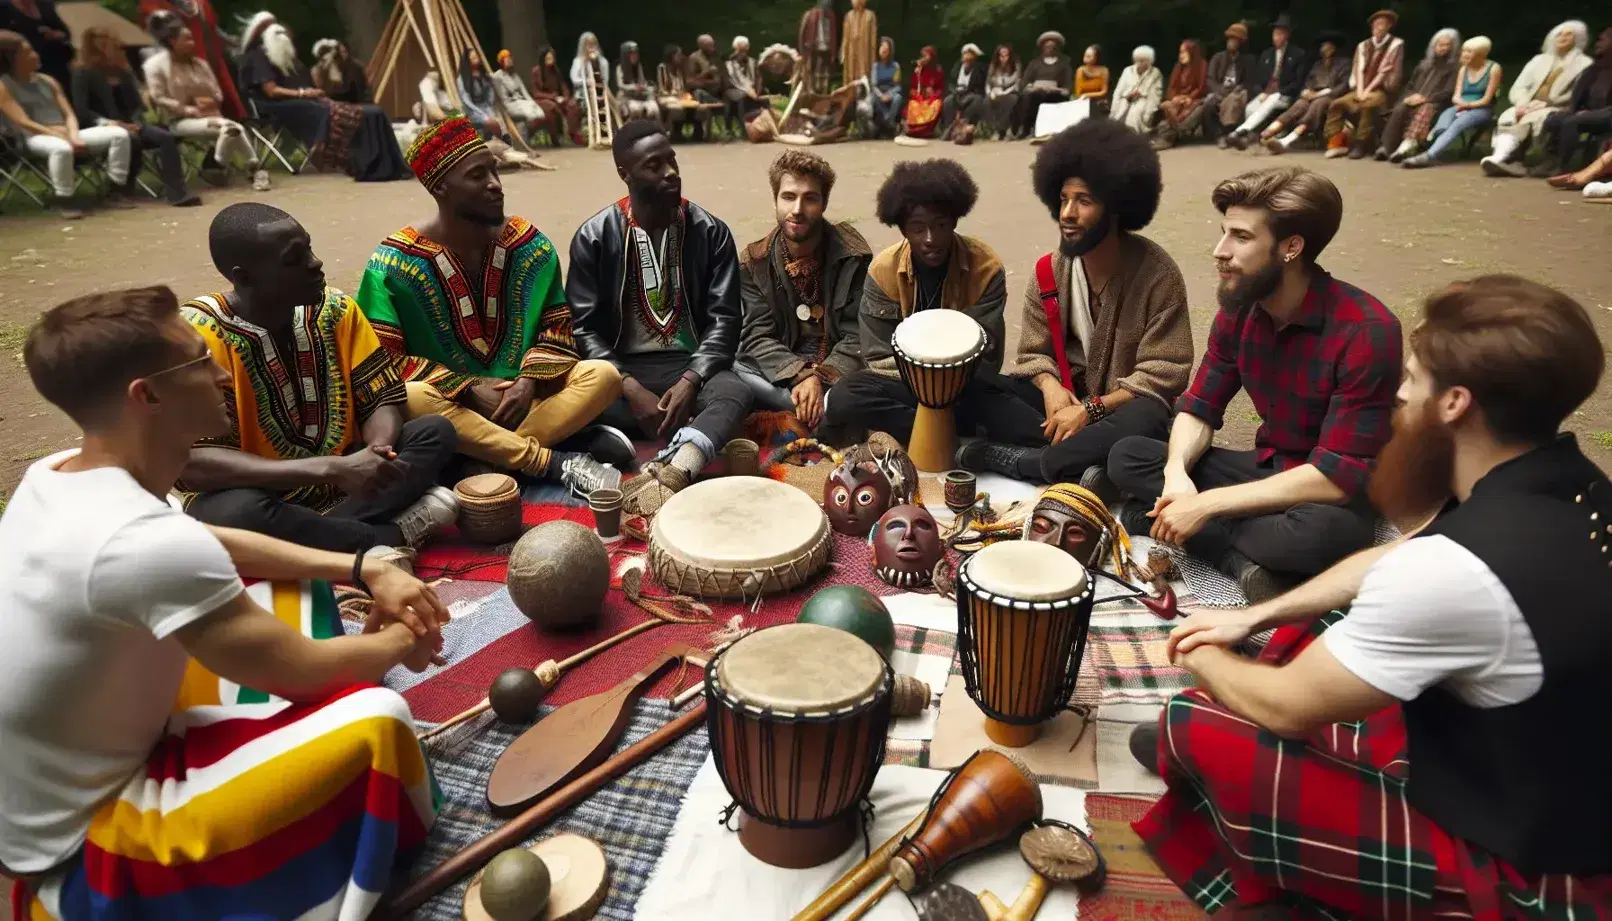 Outdoor gathering of multicultural people sitting in a circle with cultural artifacts, including woven basket, wooden mask and musical instruments.